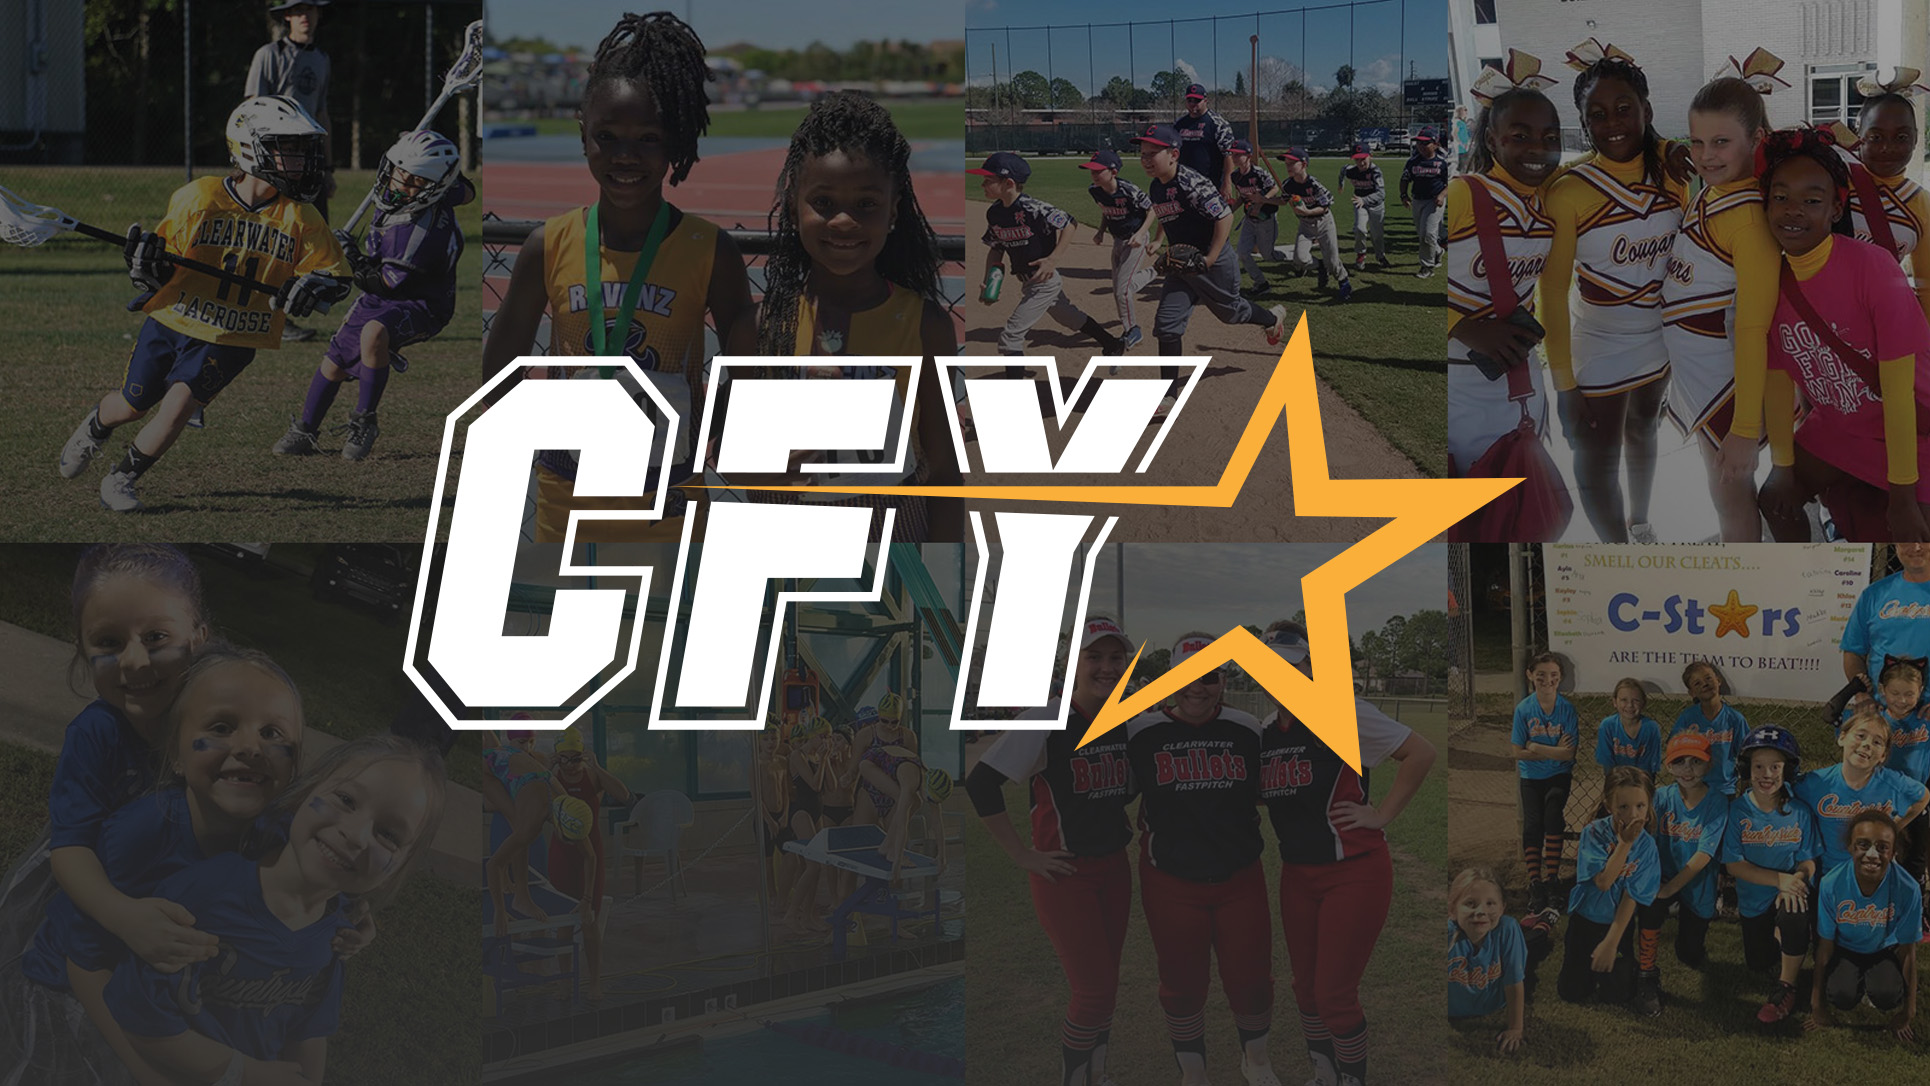 CFY Pinellas - Serving the Youth of Pinellas County